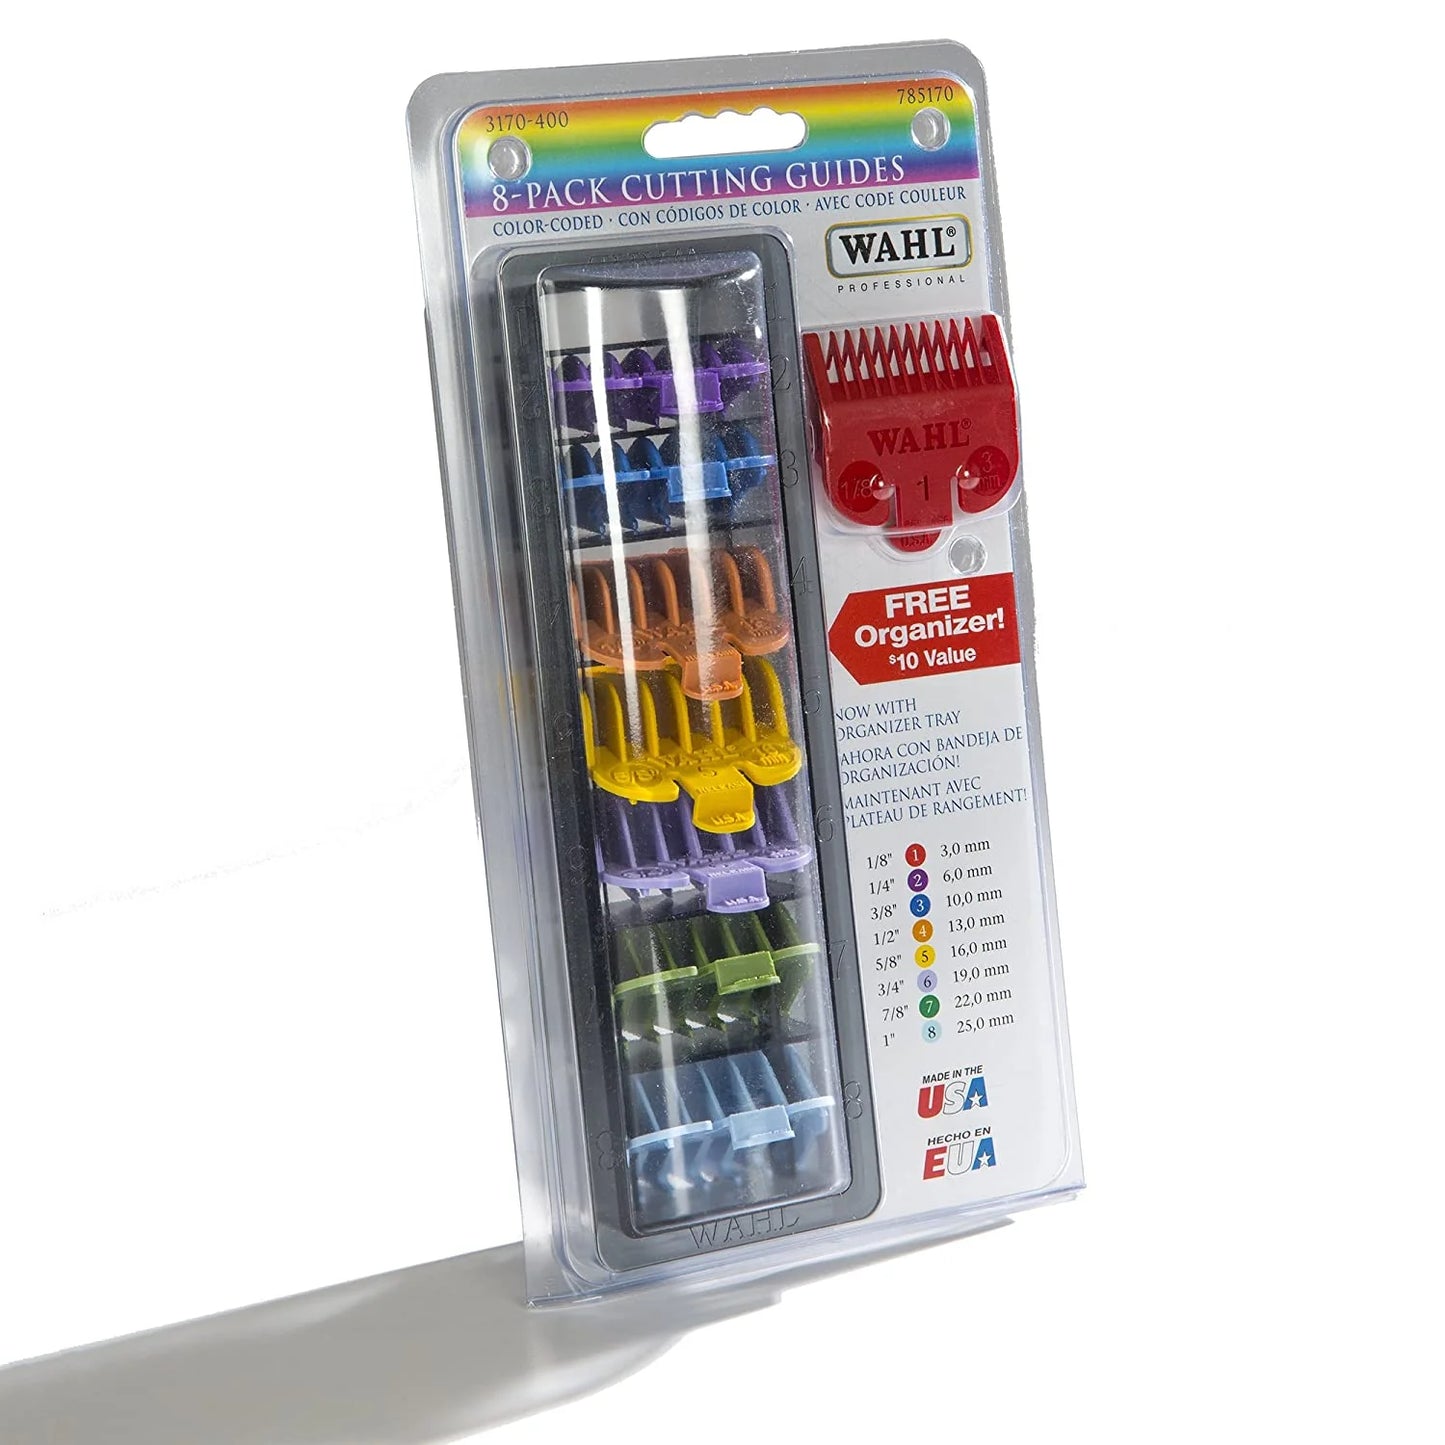 WAHL Professional 8 Color Coded Cutting Guides with Organizer - Model #3170-400